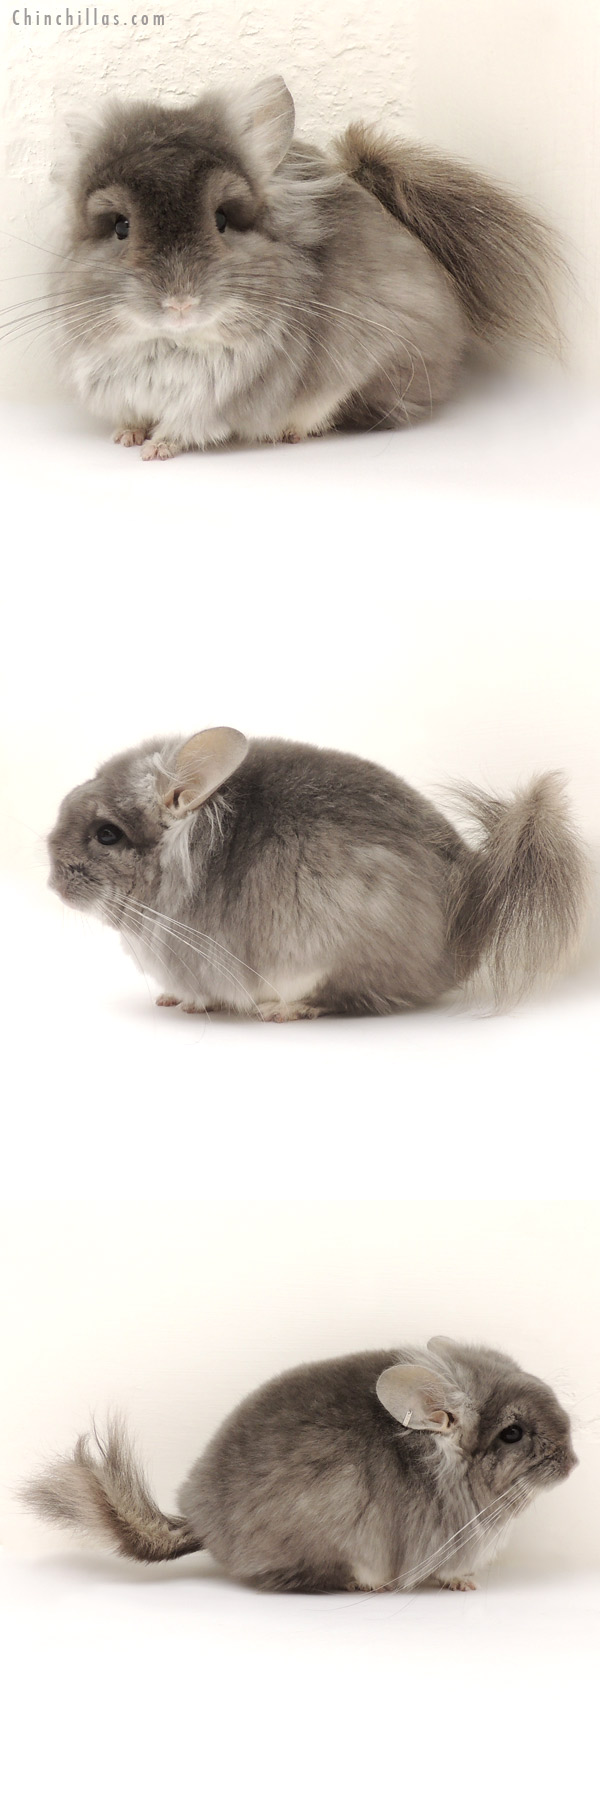 Chinchilla or related item offered for sale or export on Chinchillas.com - 14130 Exceptional Violet  Royal Persian Angora Male Chinchilla with Lion Mane